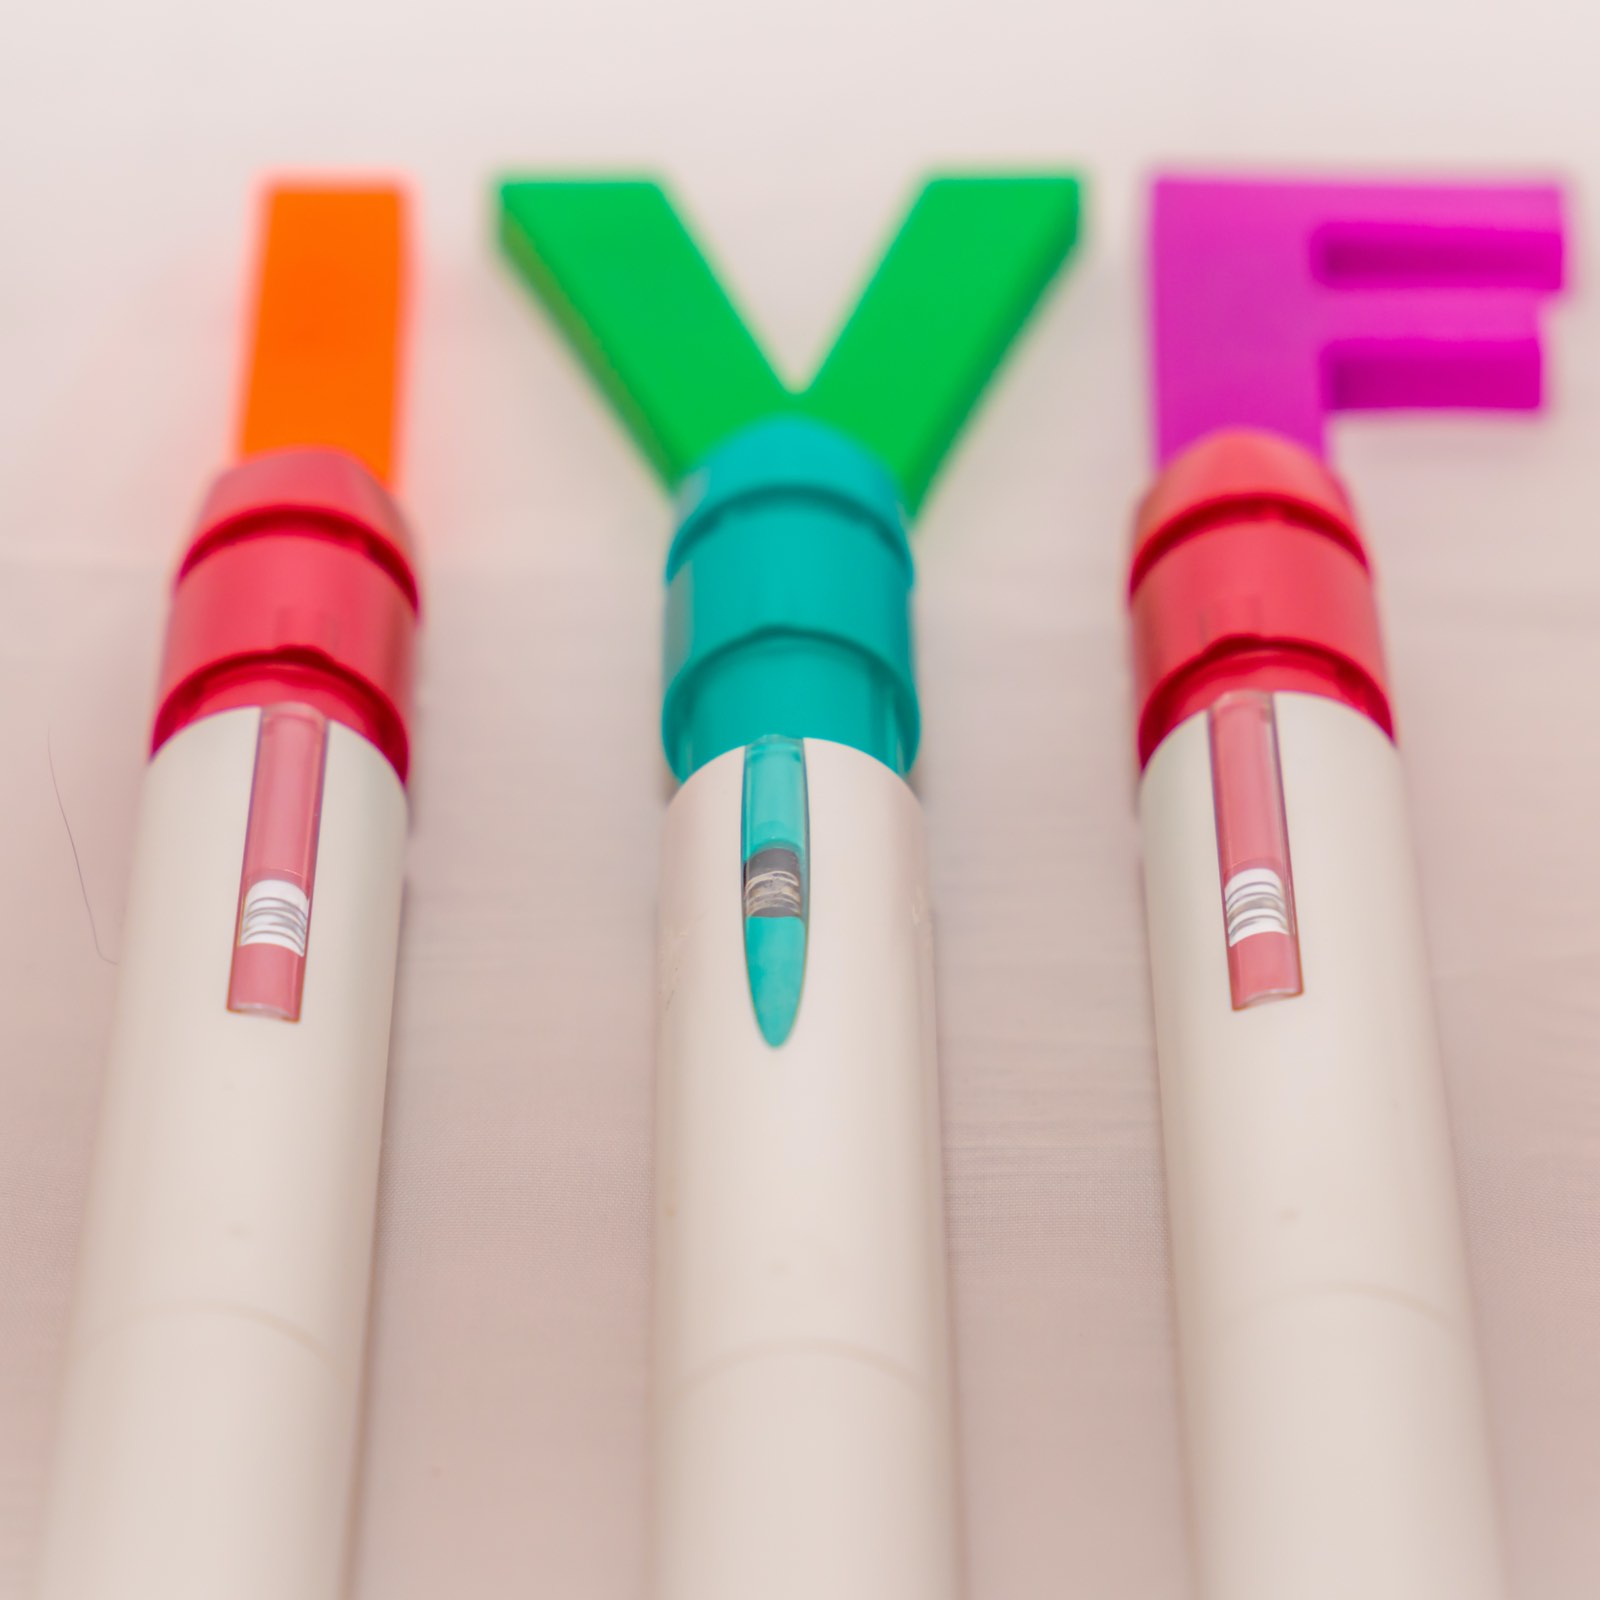 letters IVF on top of ivf injections